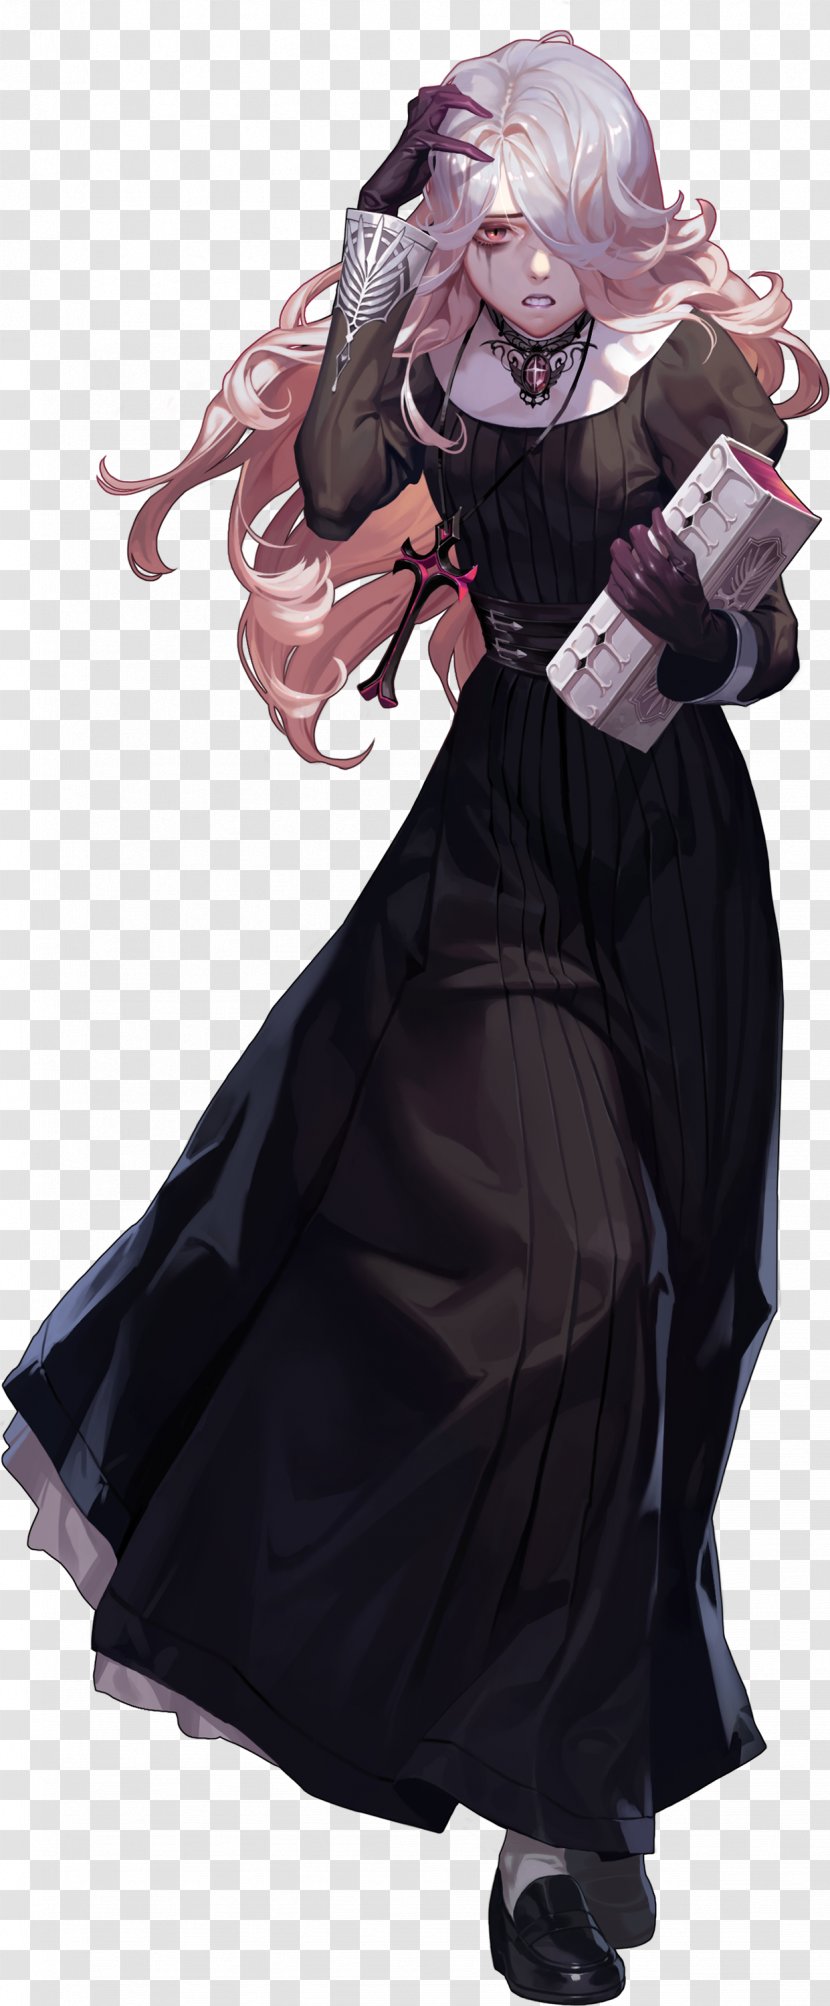 Black Survival Video Game Player Character - Fiora Transparent PNG